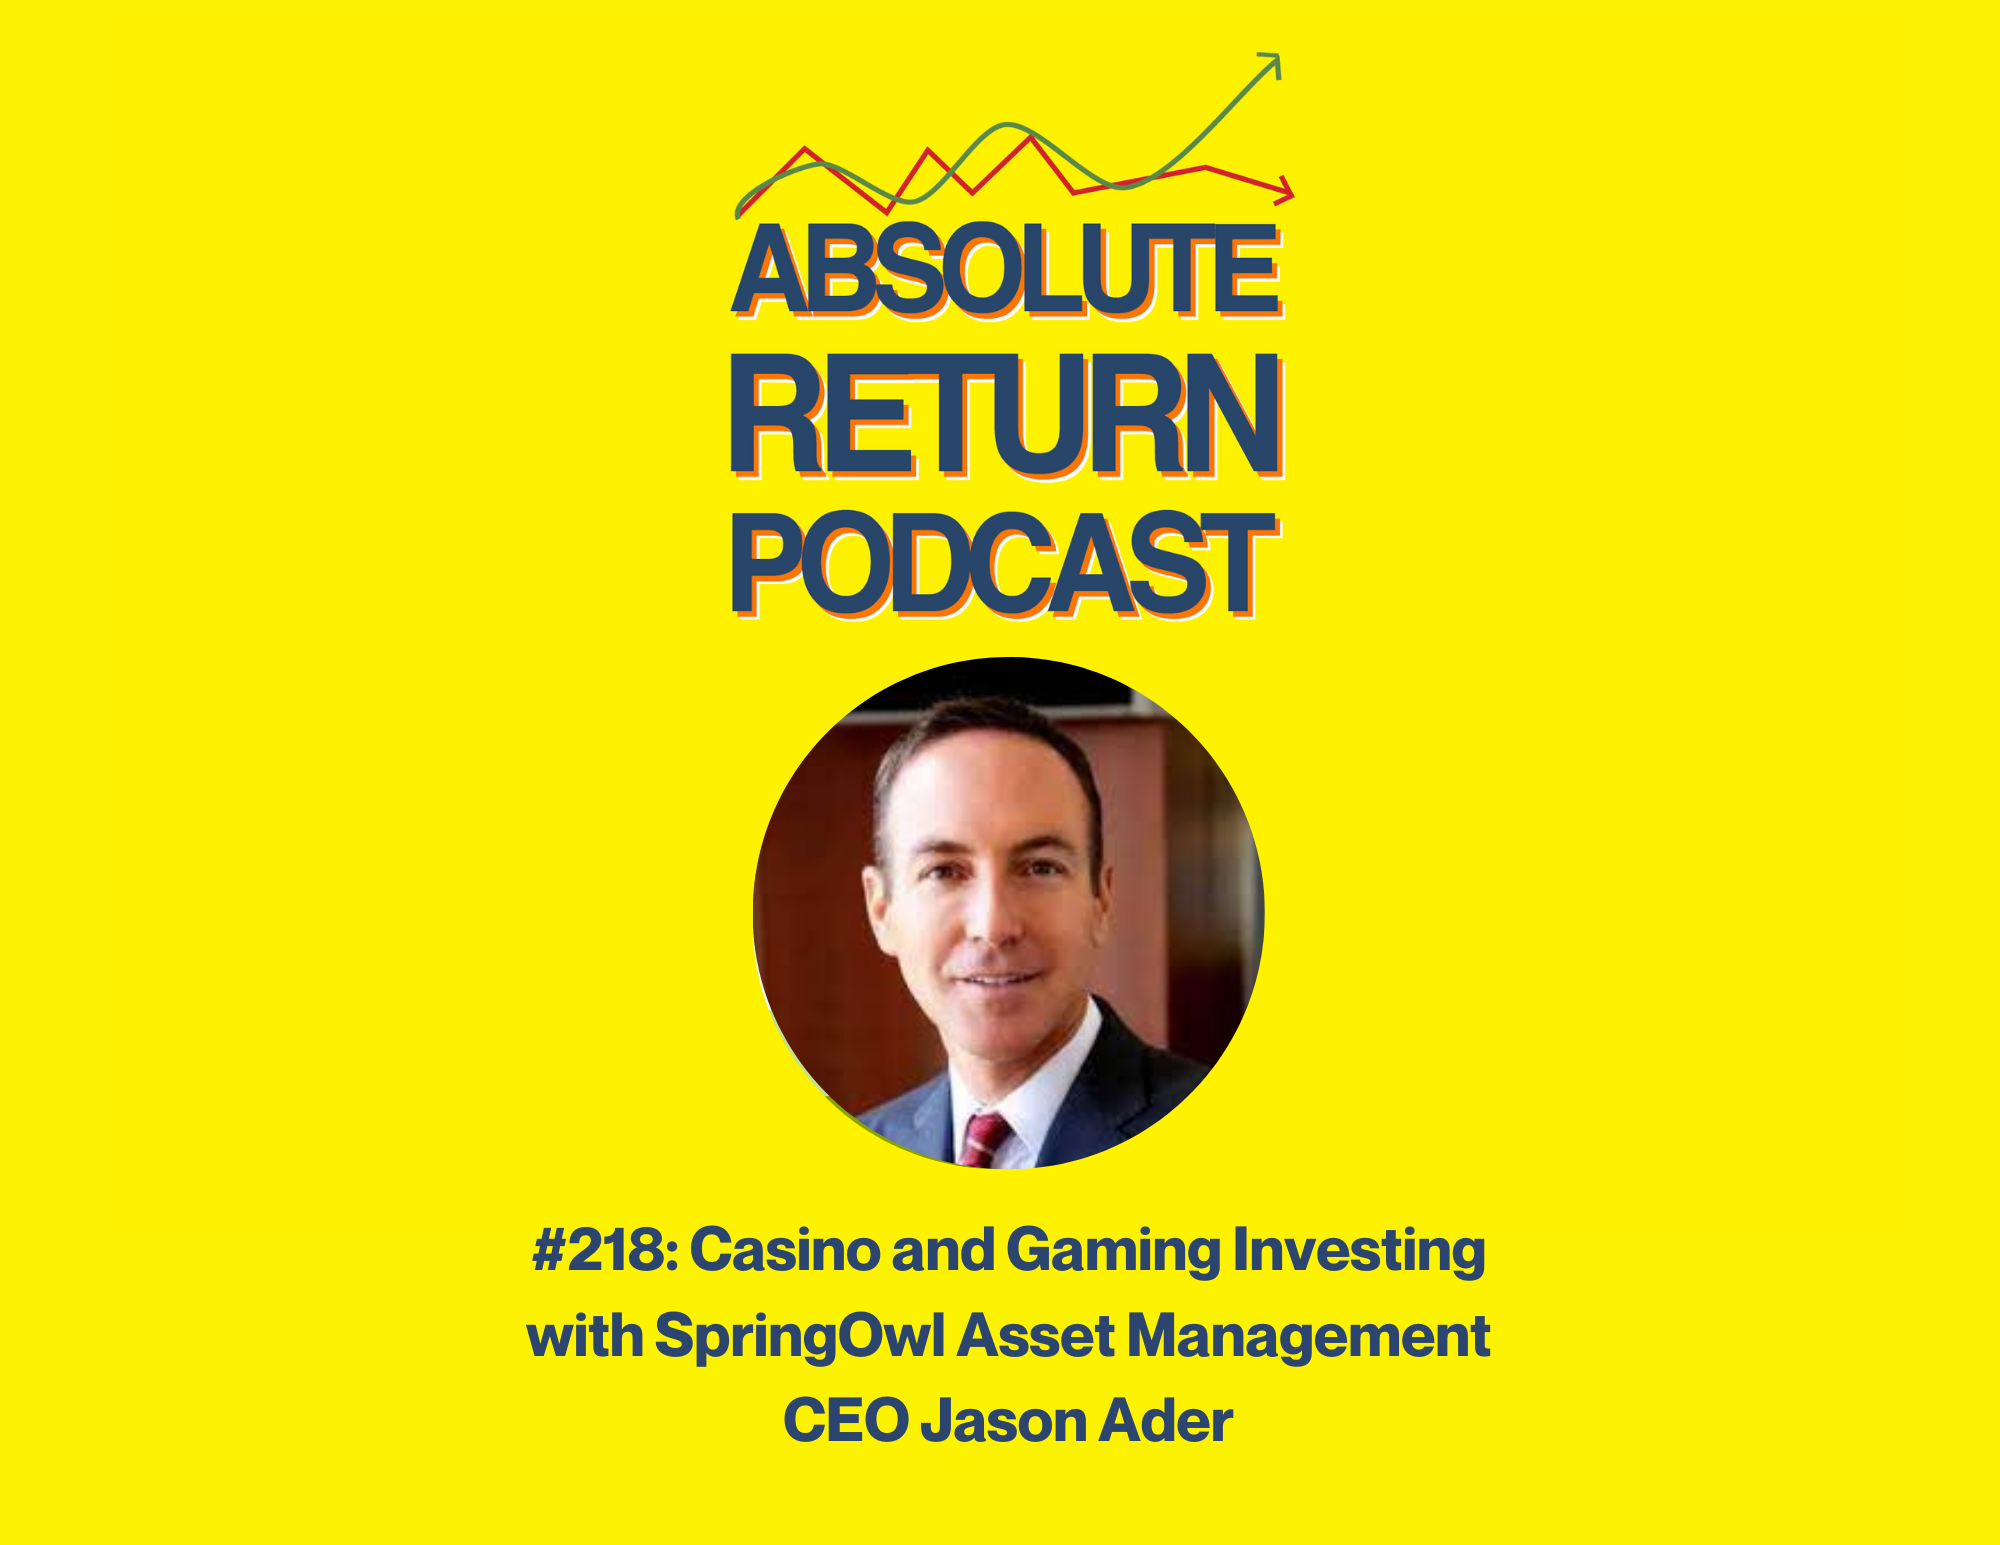 Absolute Return Podcast #218: Casino and Gaming Investing with SpringOwl Asset Management CEO Jason Ader